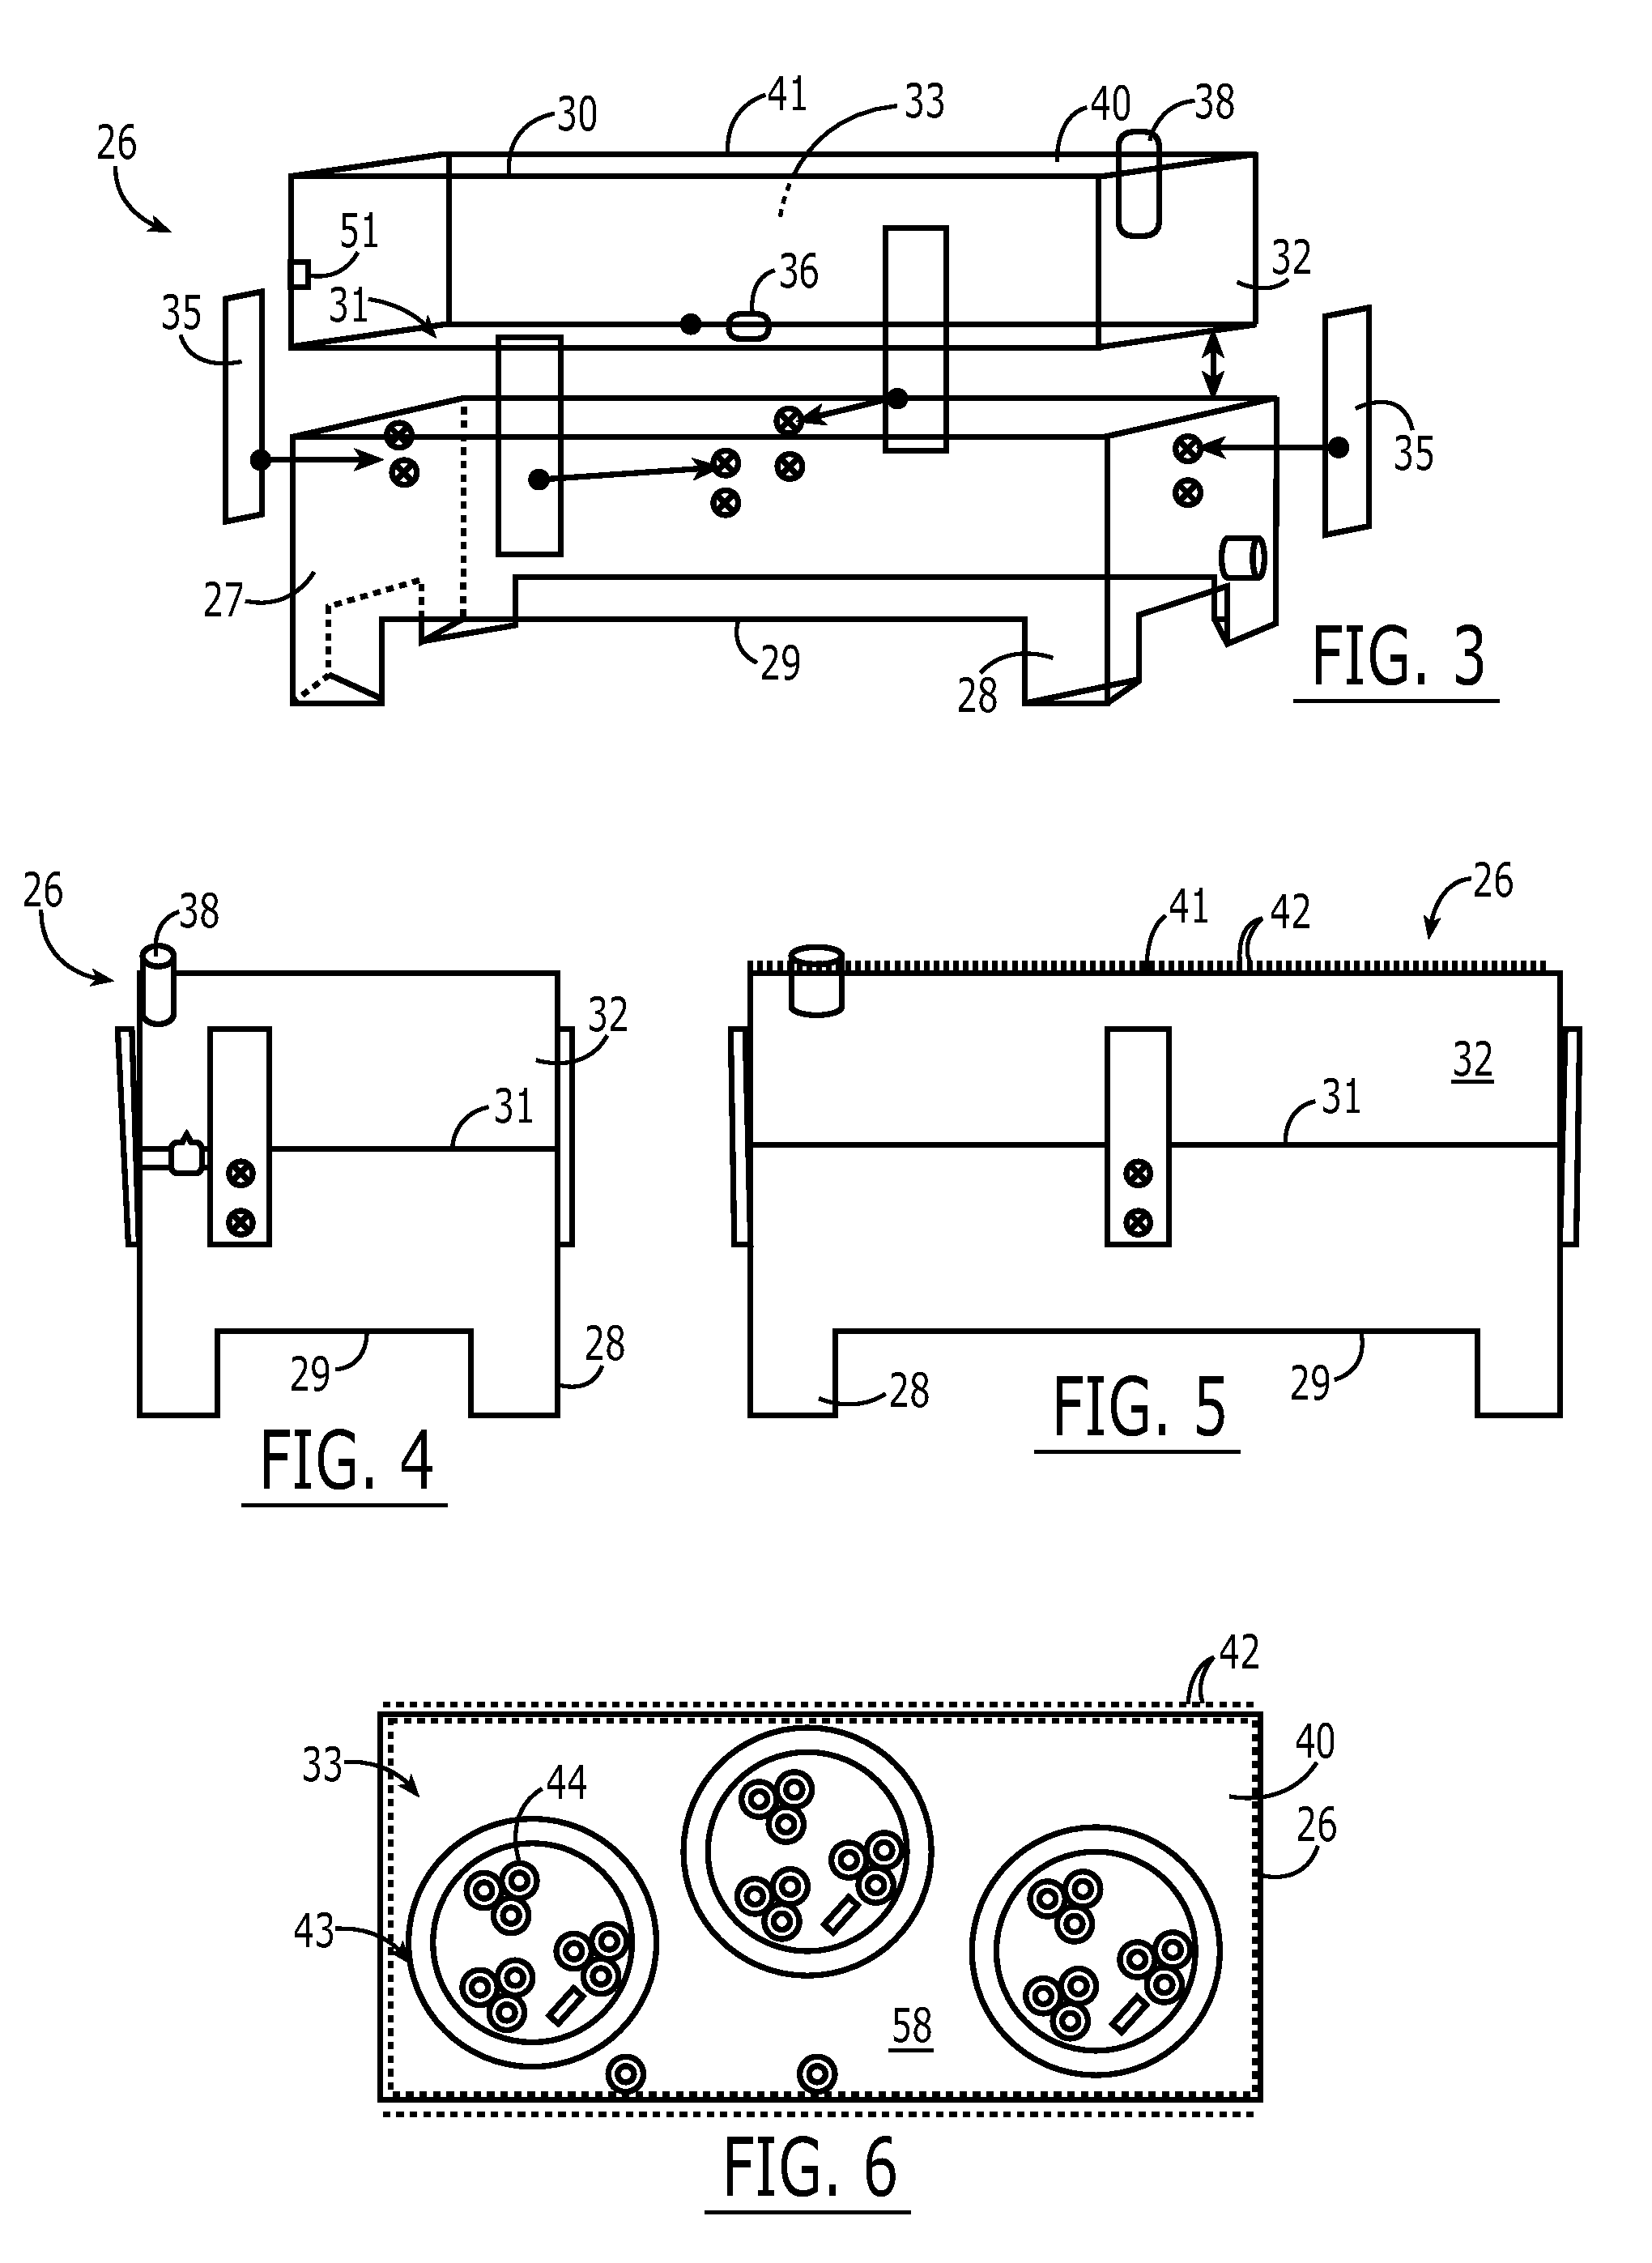 Ultrasonic Sanitation and Disinfecting Device and Associated Methods